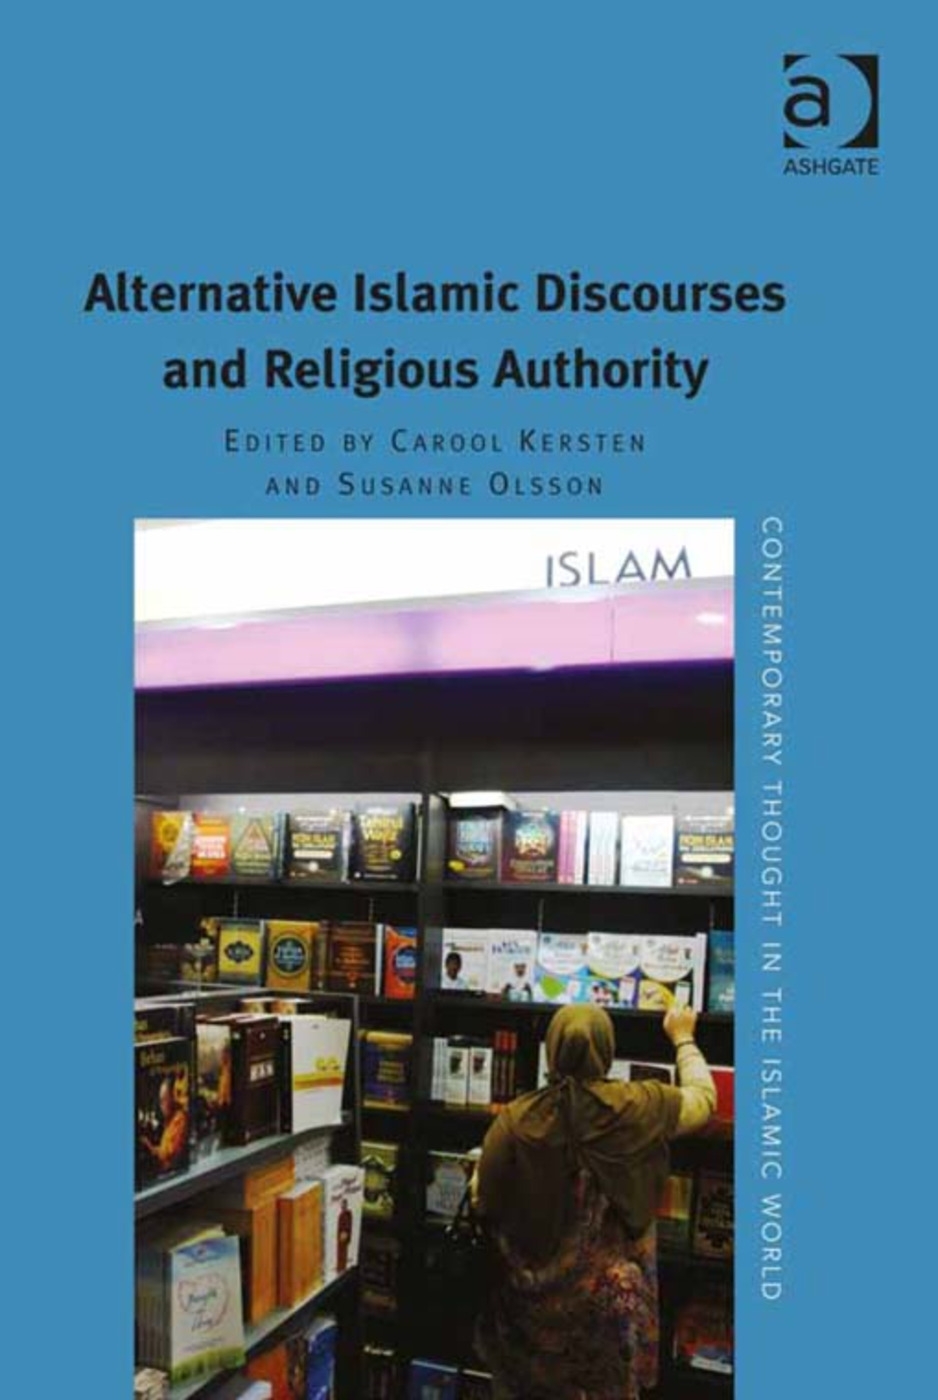 Alternative Islamic Discourses and Religious Authority. Edited by Carool Kersten, Susanne Olsson